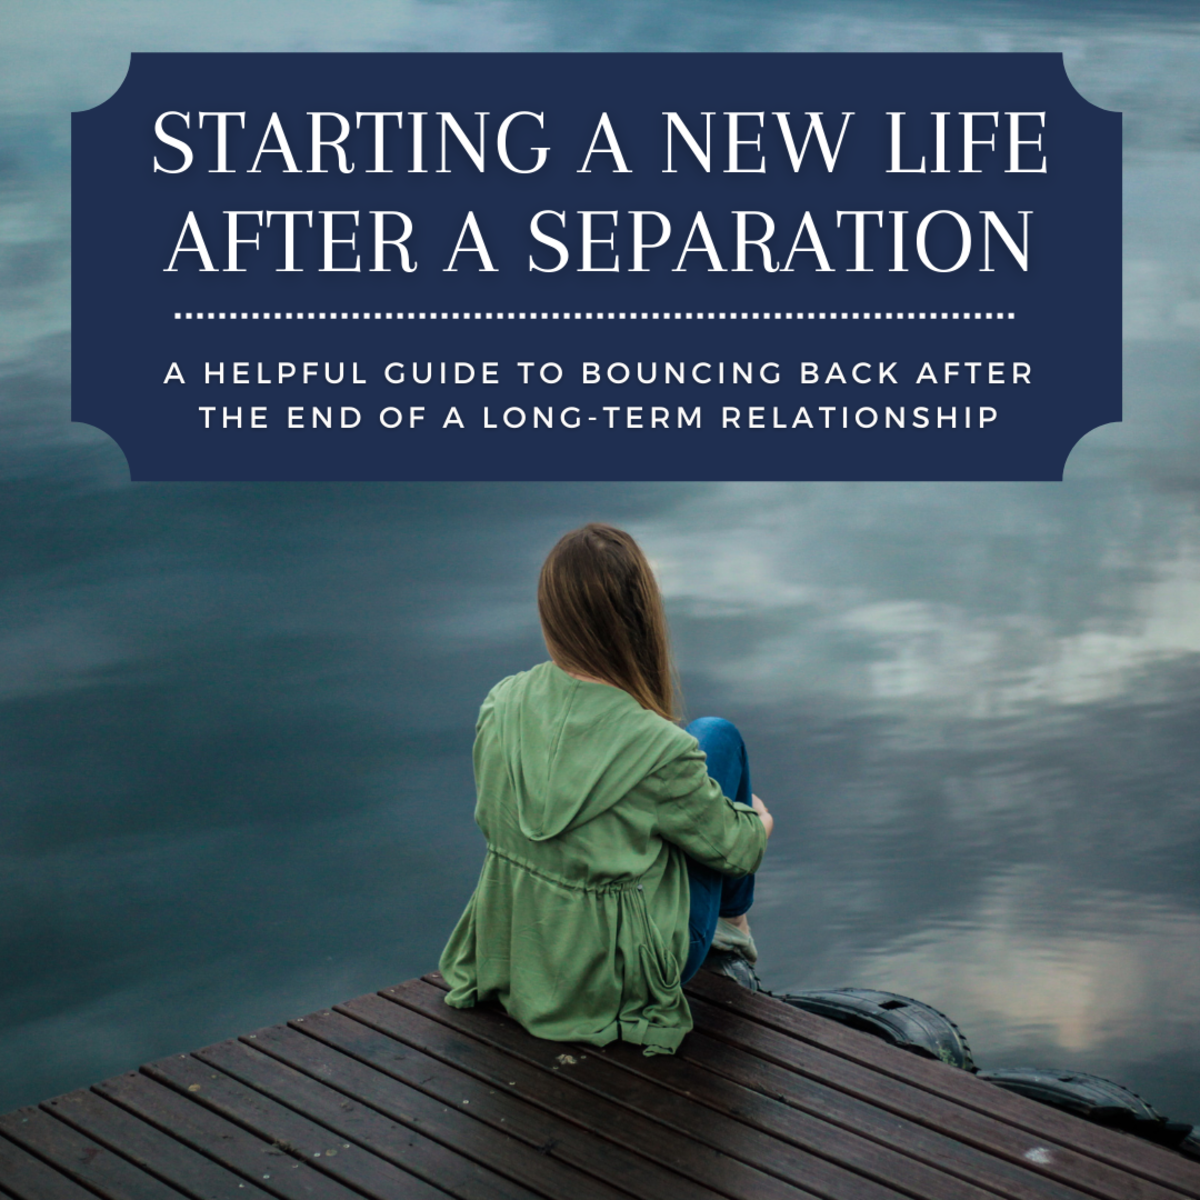 This article will provide lots of practical advice and guidance for how to recover from the dissolution of a long-term relationship.